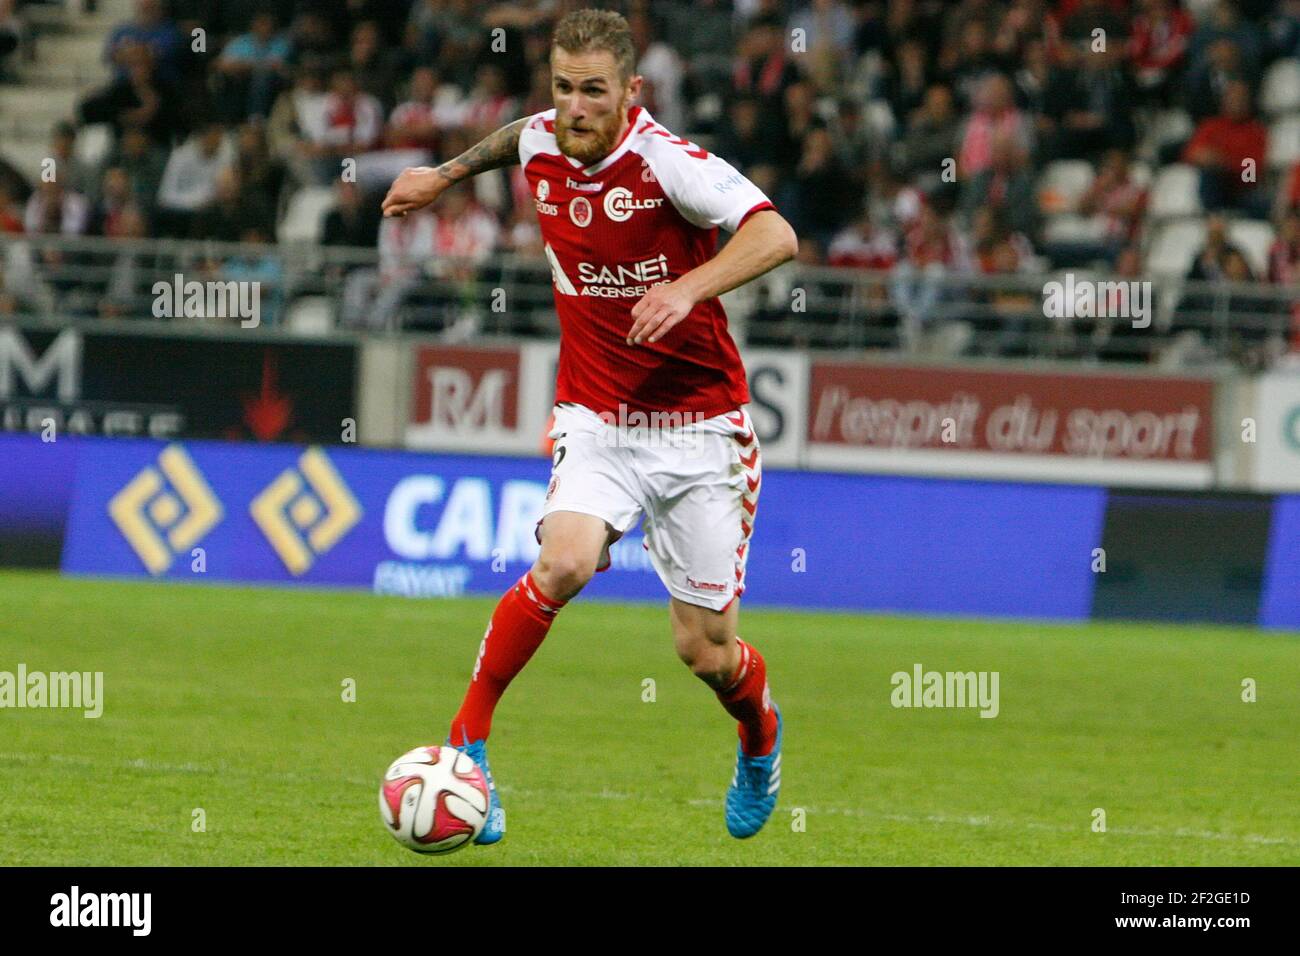 Antoine DEVAUX (Reims) during the french L1 football match between Stade de Reims and Toulouse FC at Auguste Delaune stadium, Reims on september 13, 2014 - Photo Anthony Serpe / DPPI Stock Photo